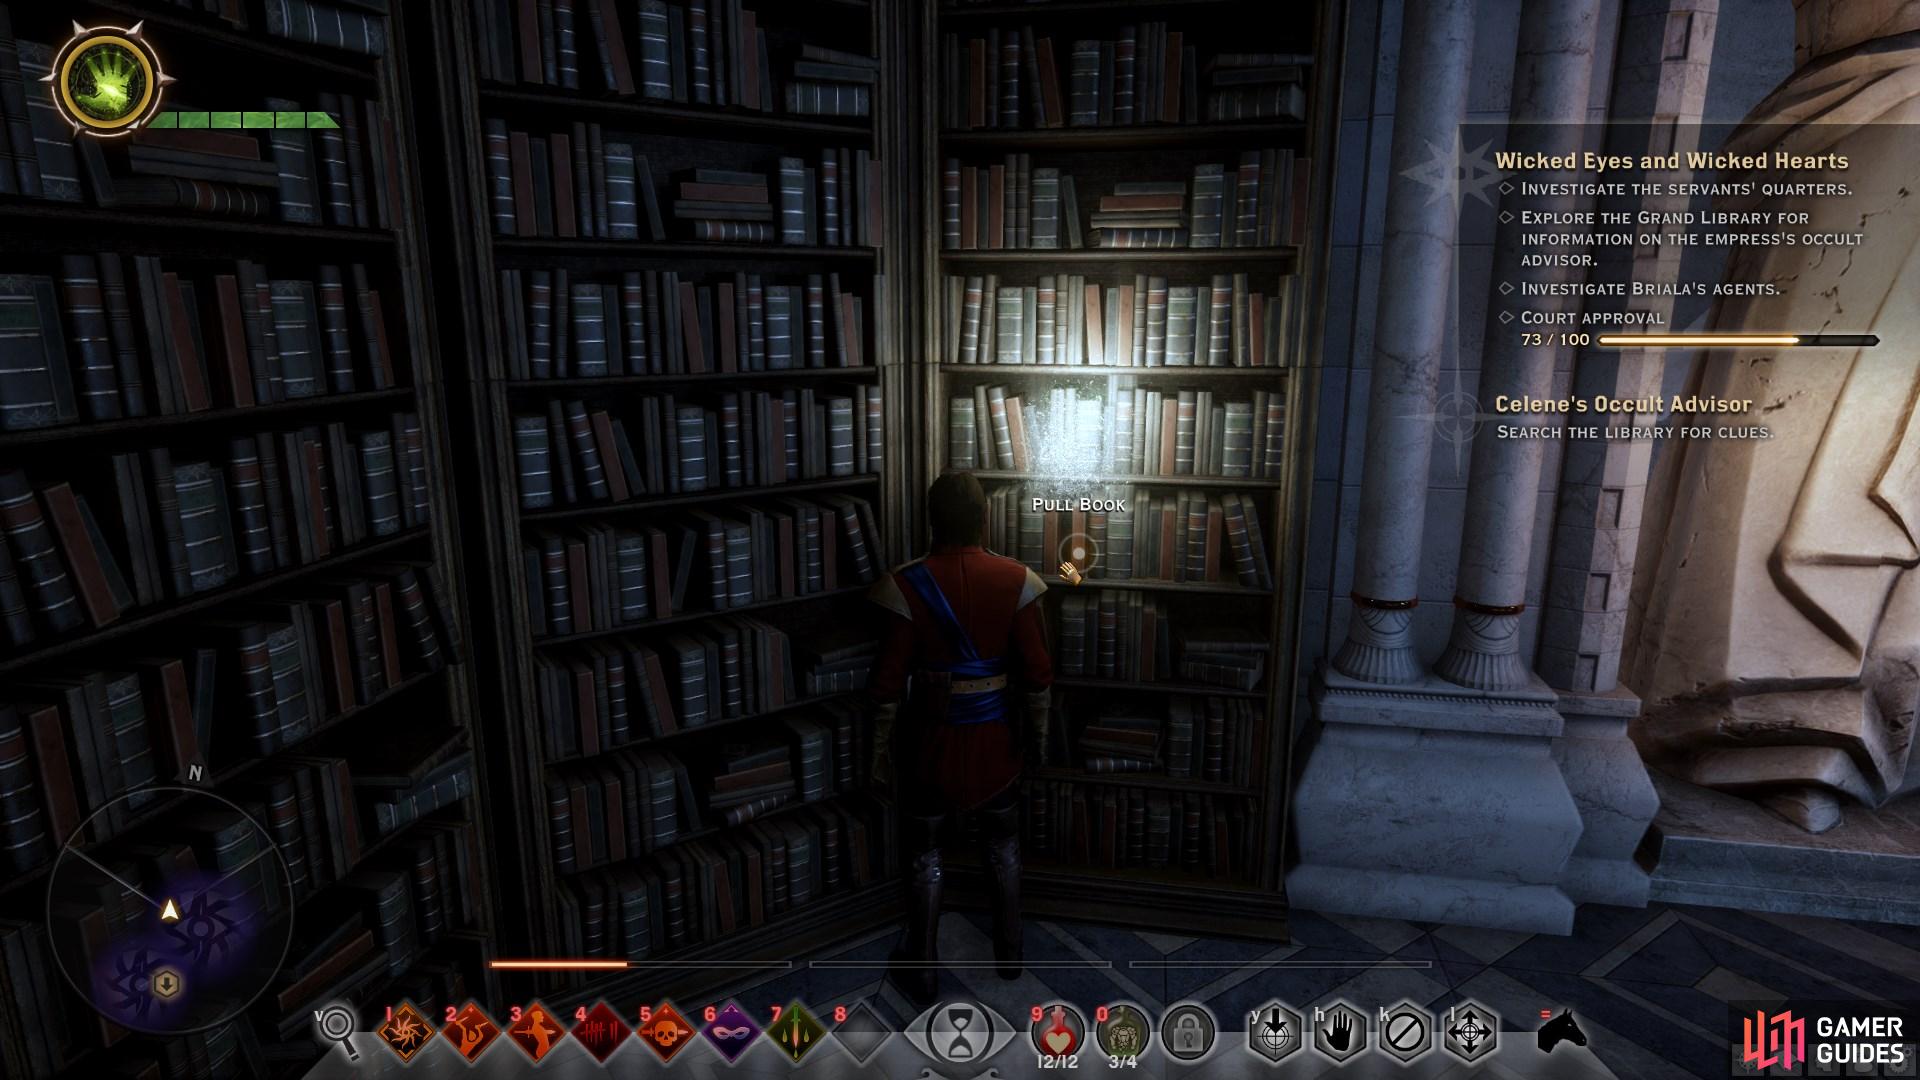 Pull the book to unlock the secret door leading to the torch and some loot.